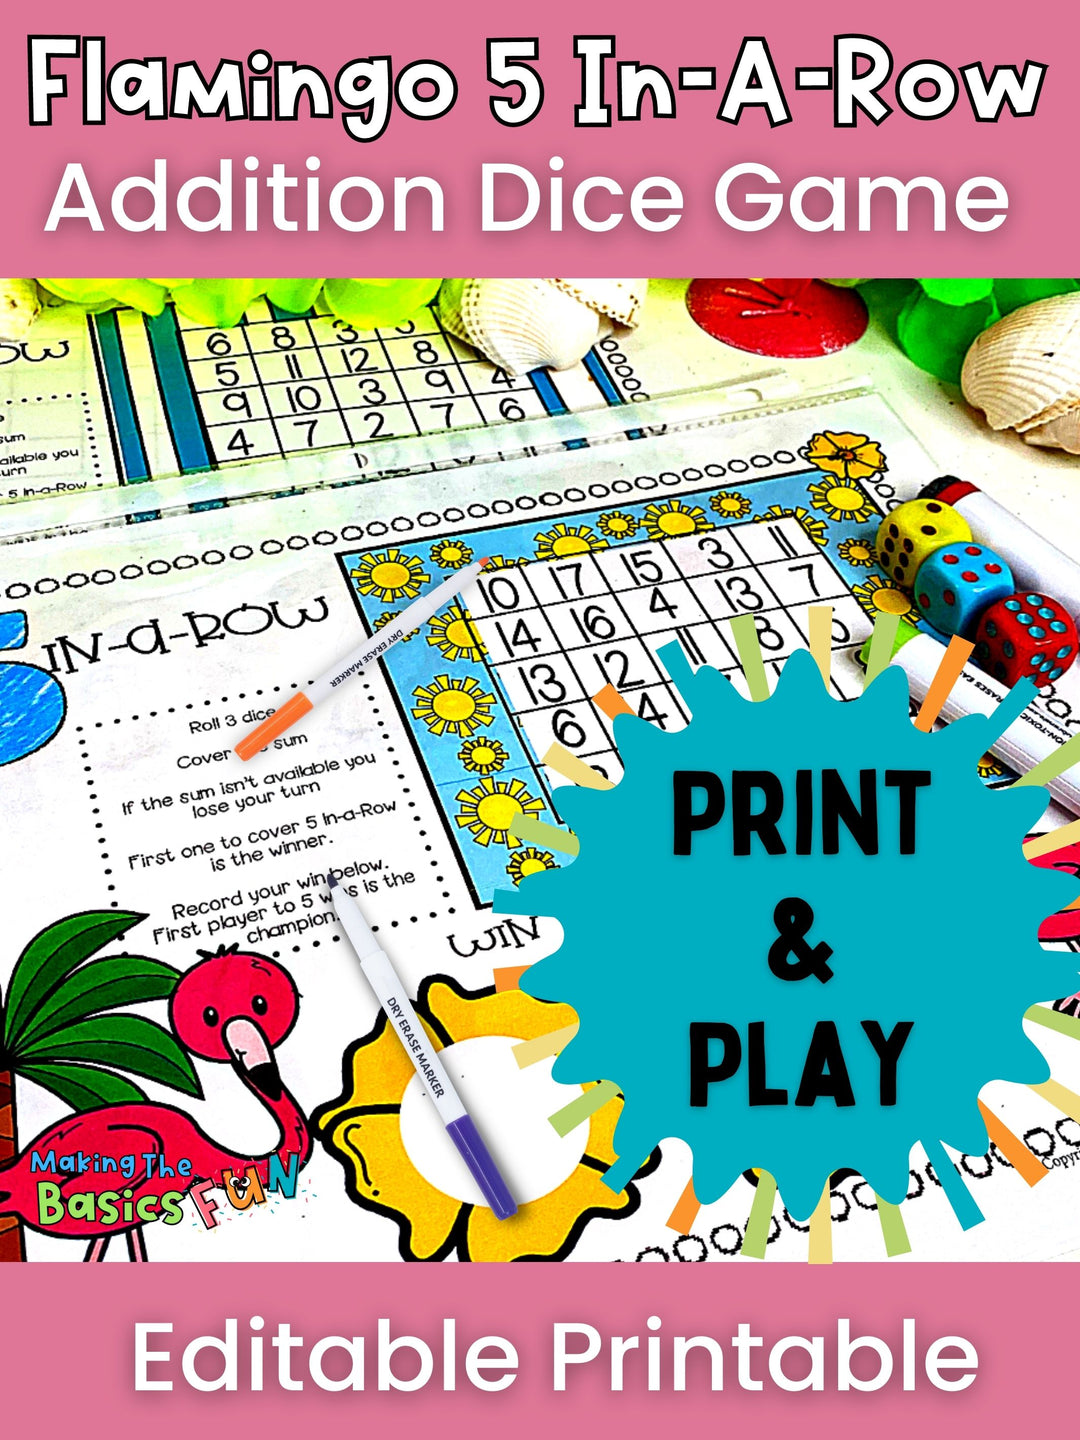 Addition dice game with flamingo theme. Game board has a 5 by 5 grid with numbers that students cover to get 5 in a row after they find the sum of 2 or 3 dice. 